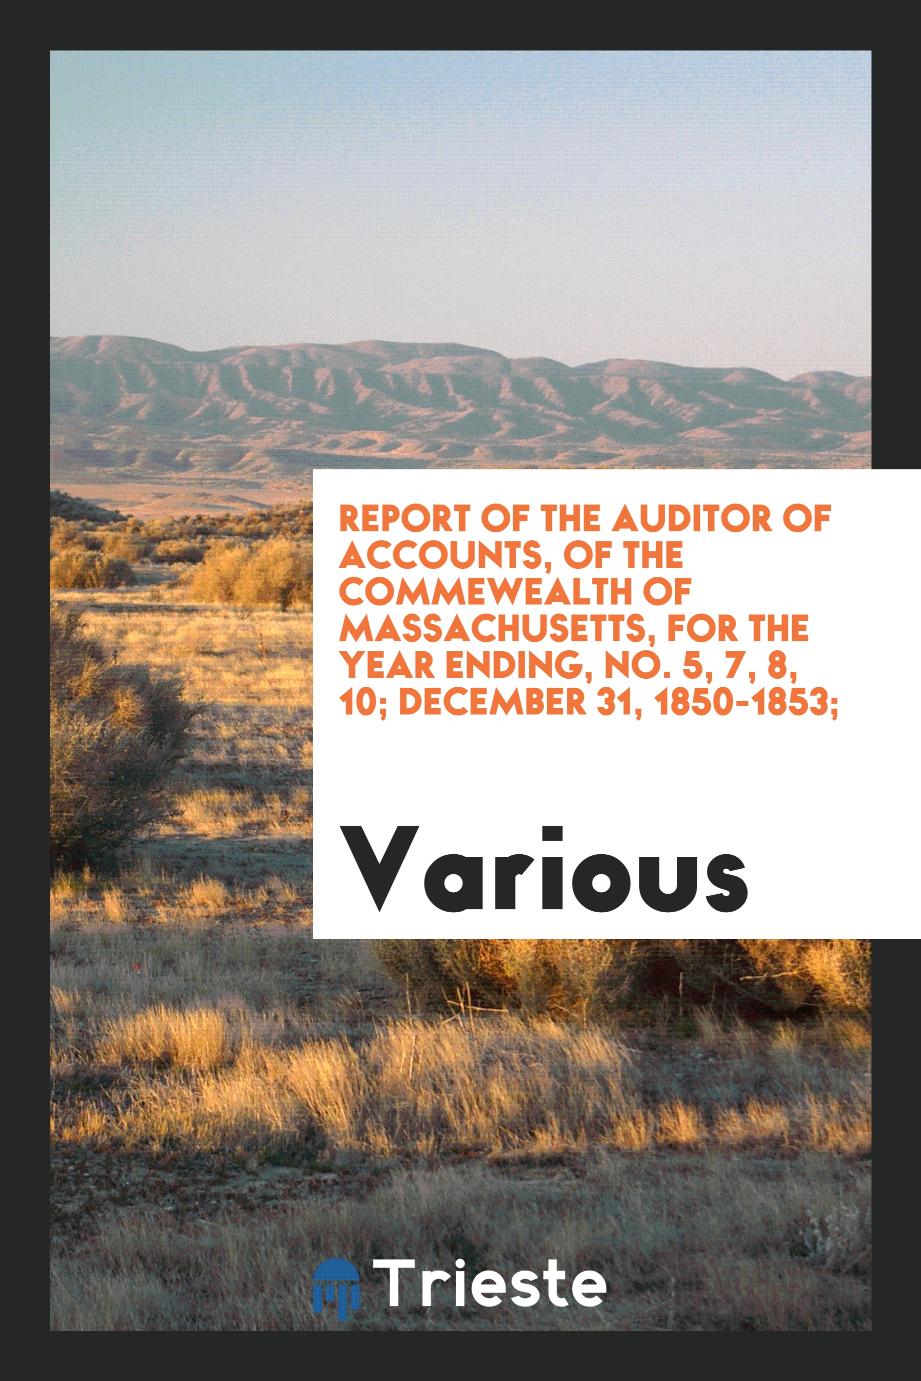 Report of the auditor of accounts, of the Commewealth of Massachusetts, for the year ending, No. 5, 7, 8, 10; December 31, 1850-1853;